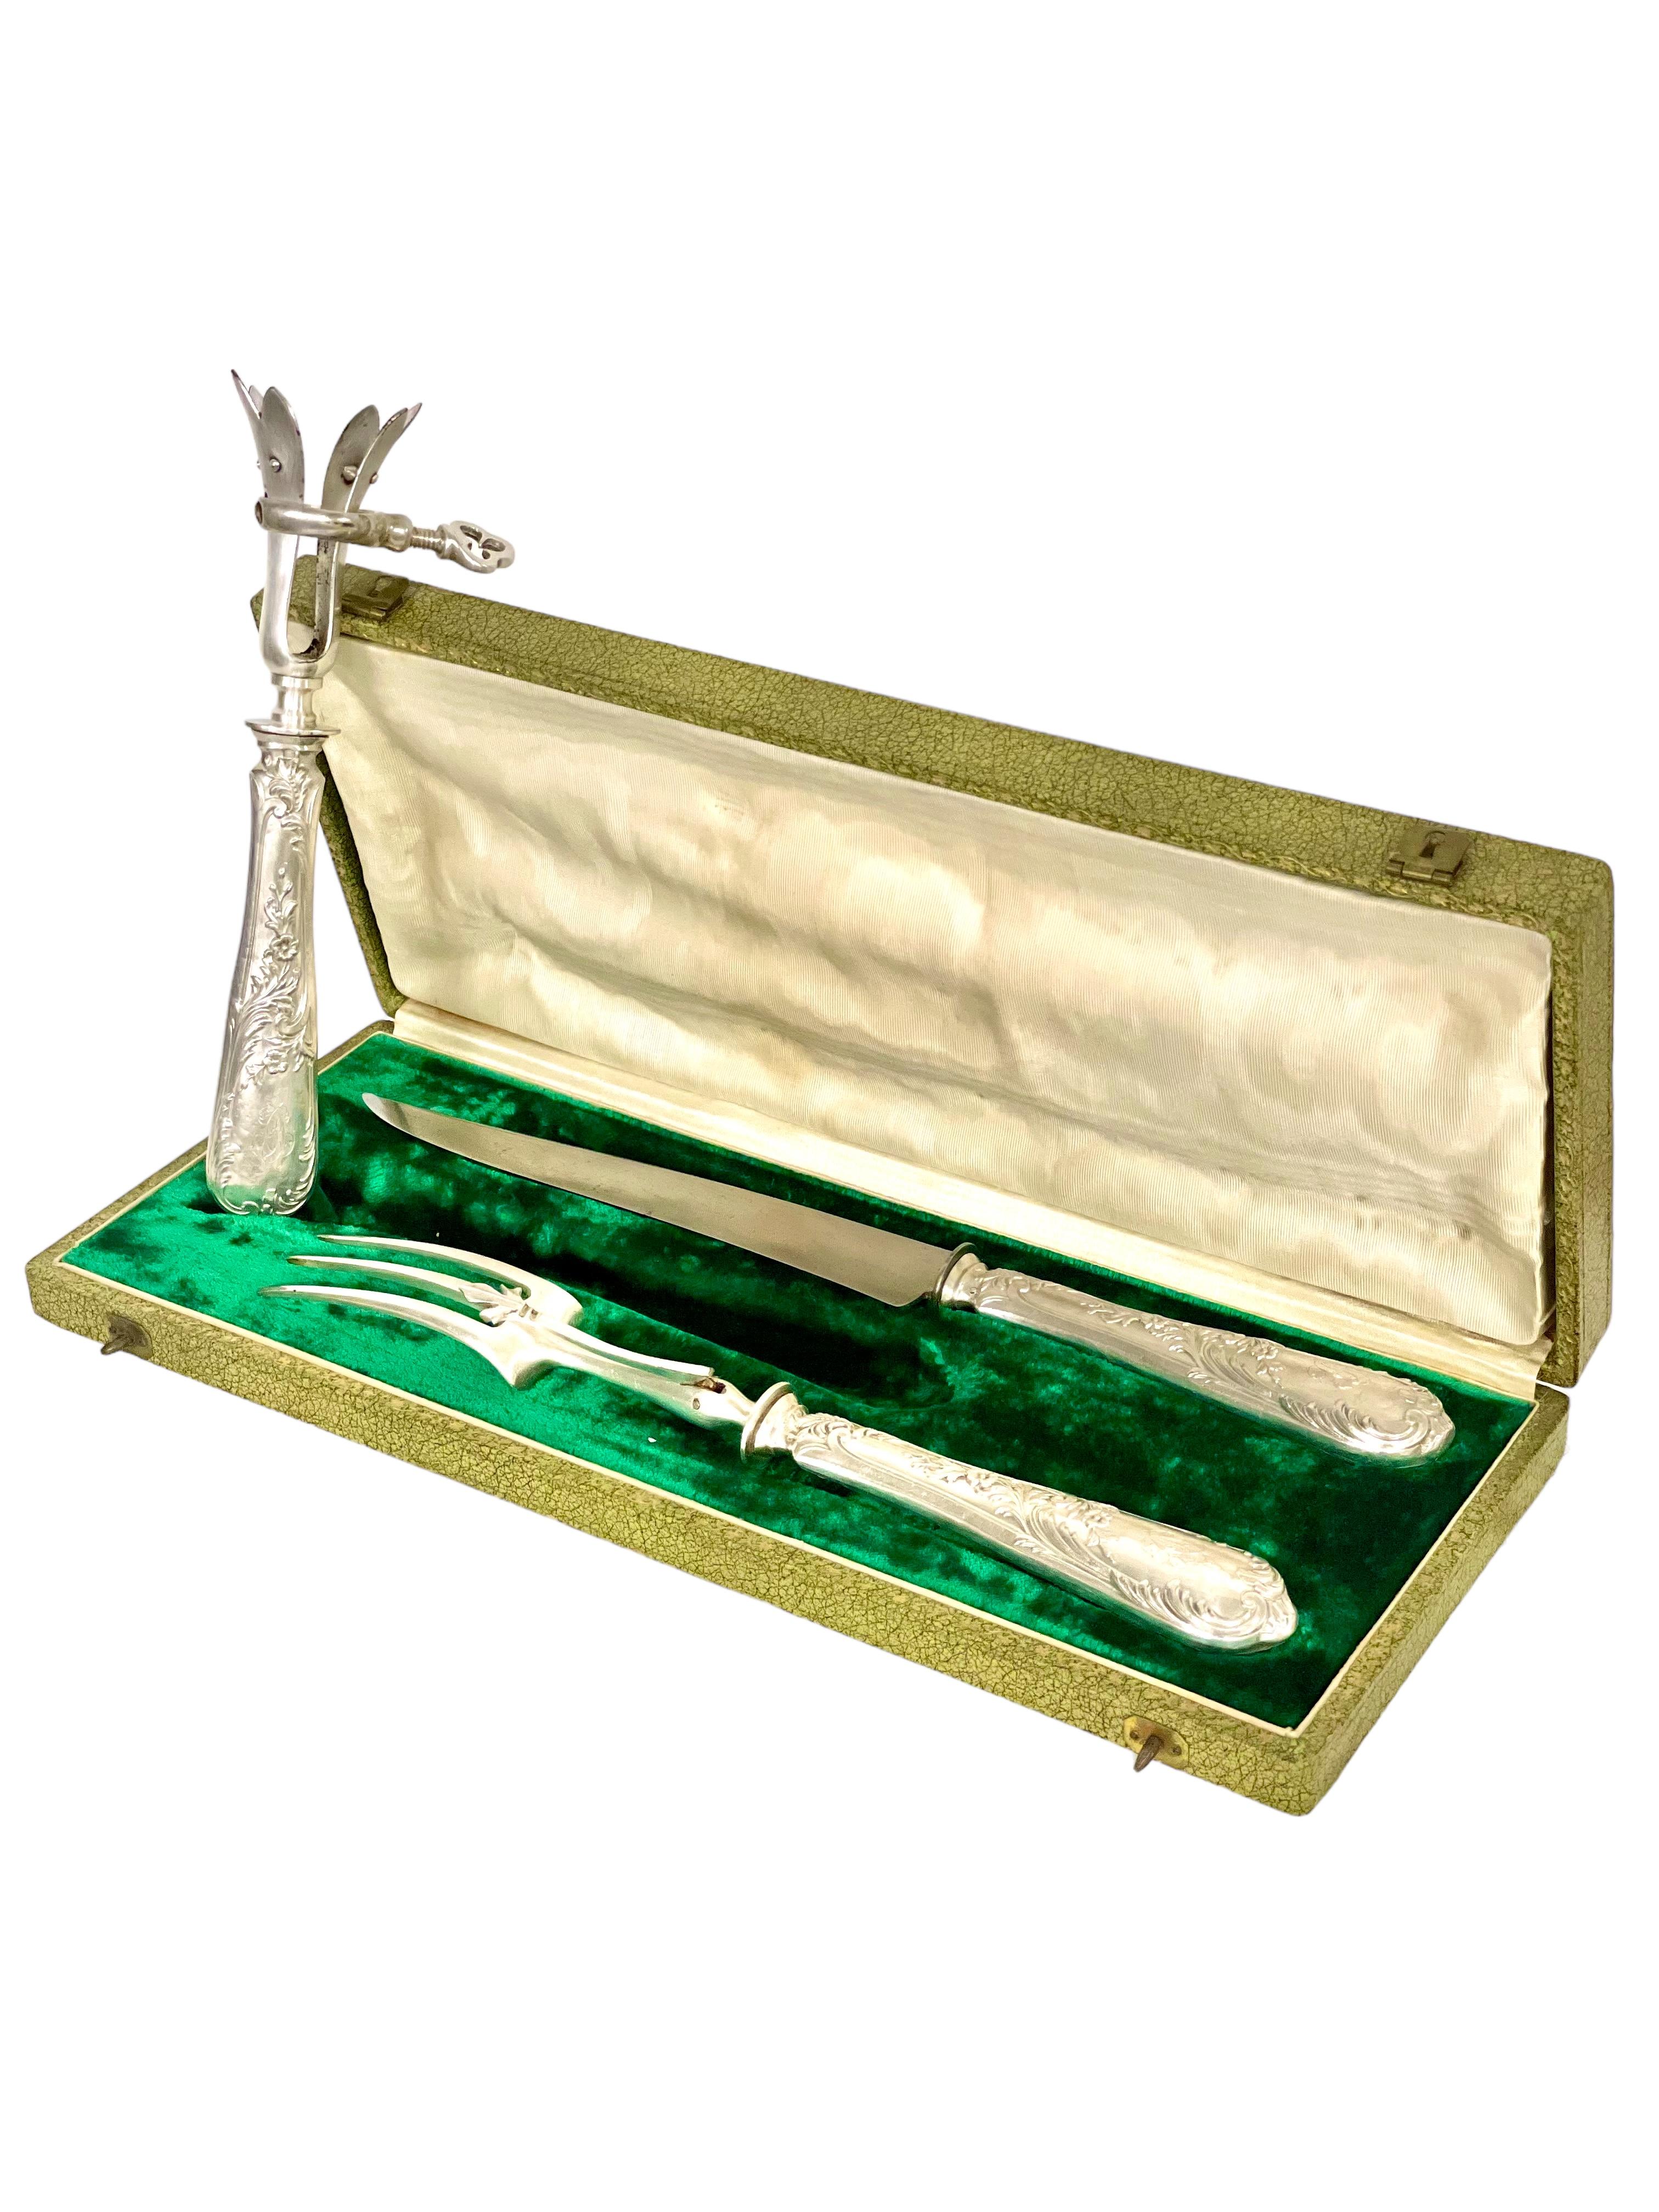 19th Century French Louis XIV Style Gigot Lamb Silver Plated Carving Set For Sale 8